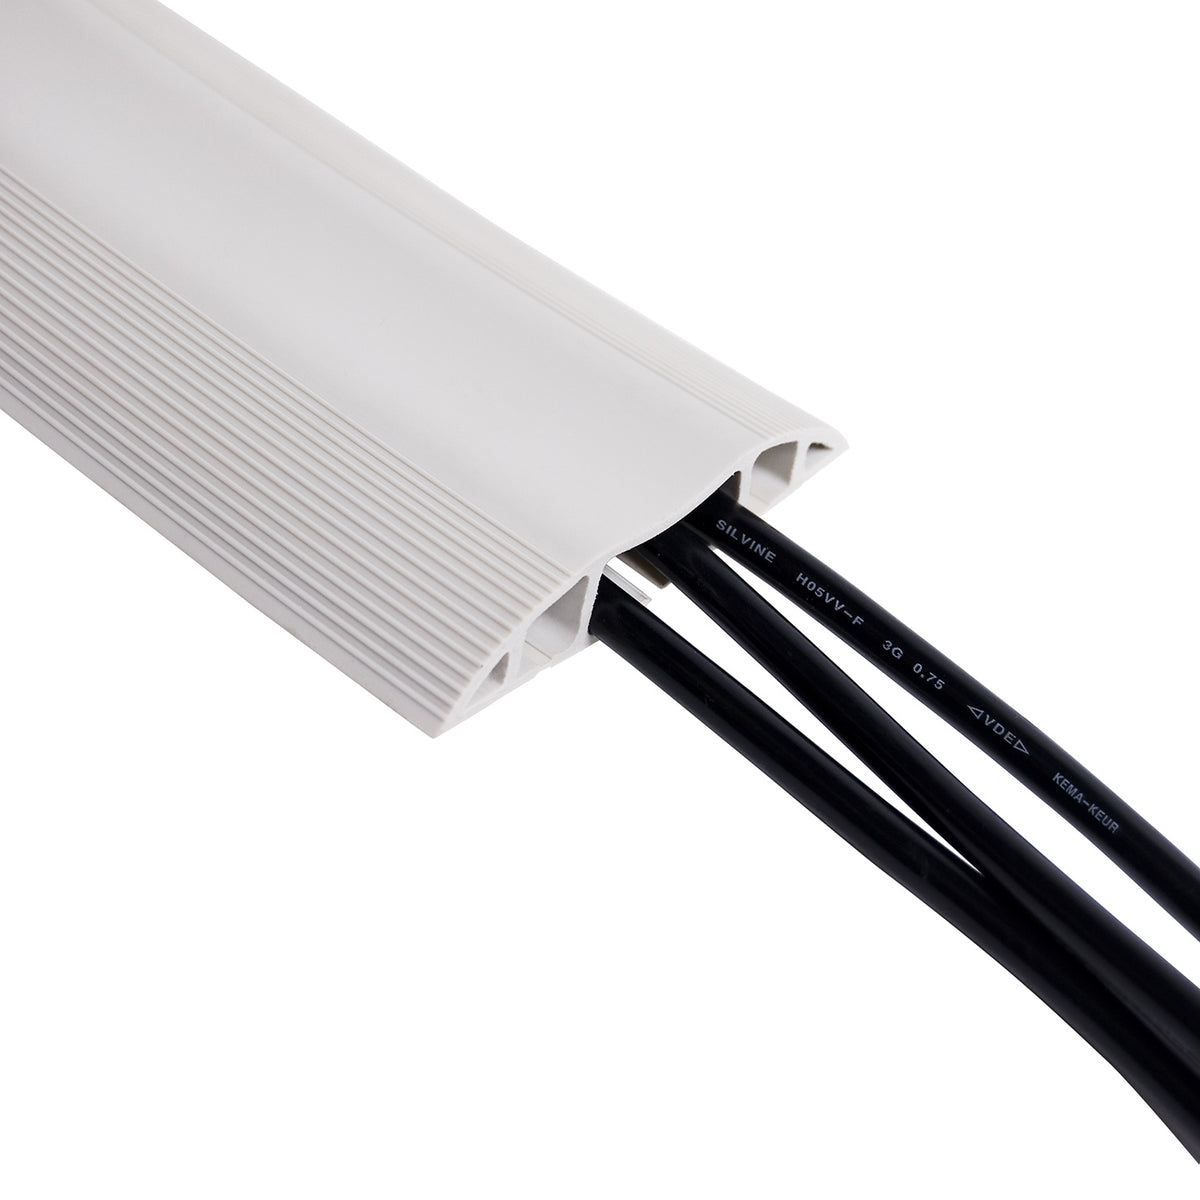 Addit cable cover 300 cm - straight